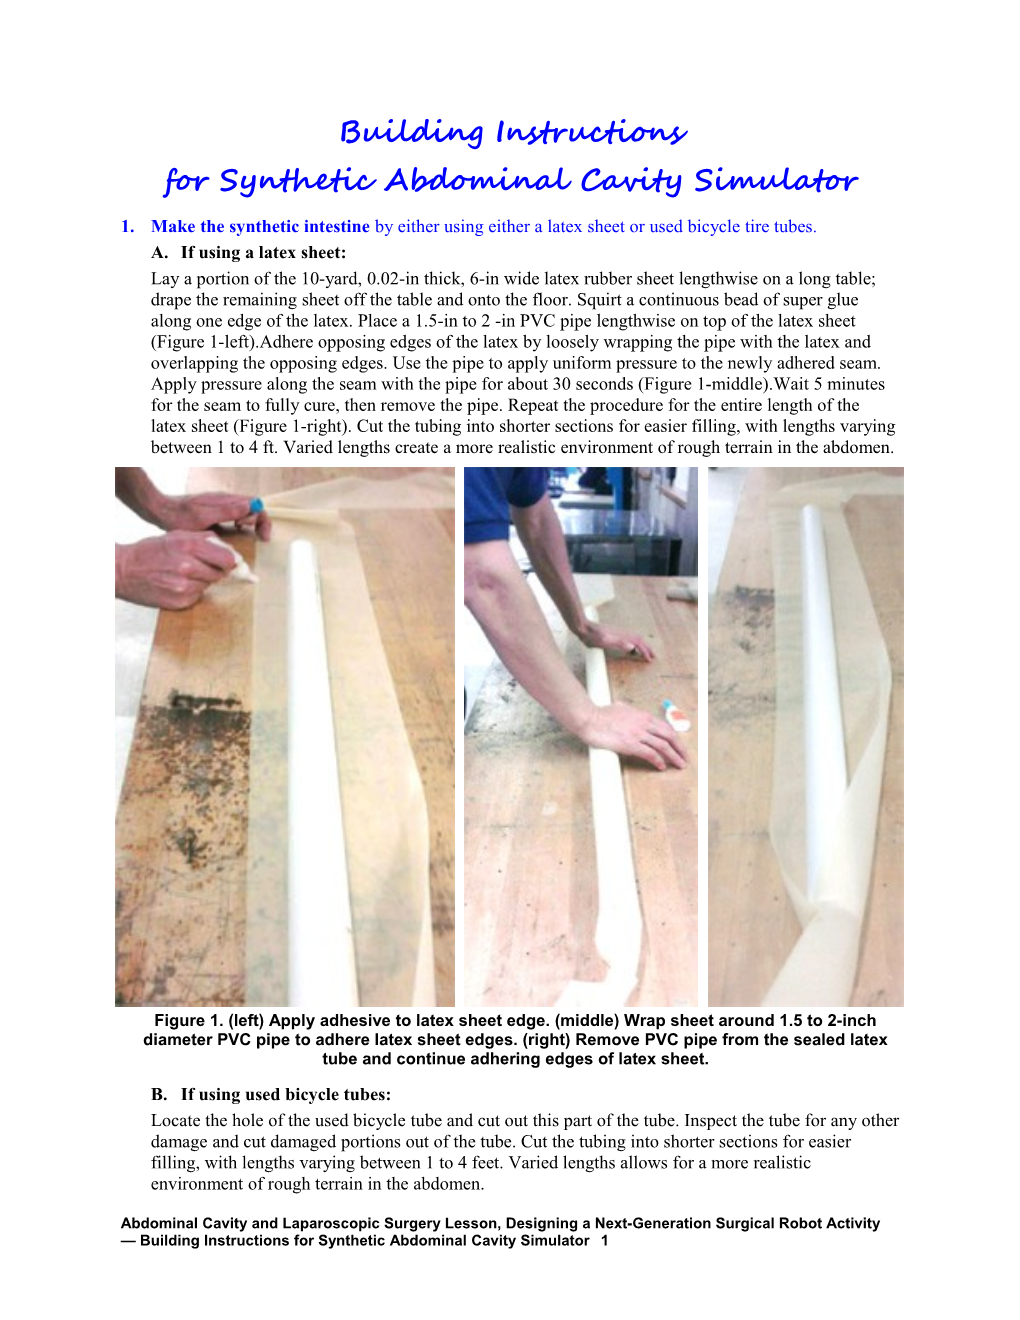 Building Instructions for Synthetic Abdominal Cavity Simulator